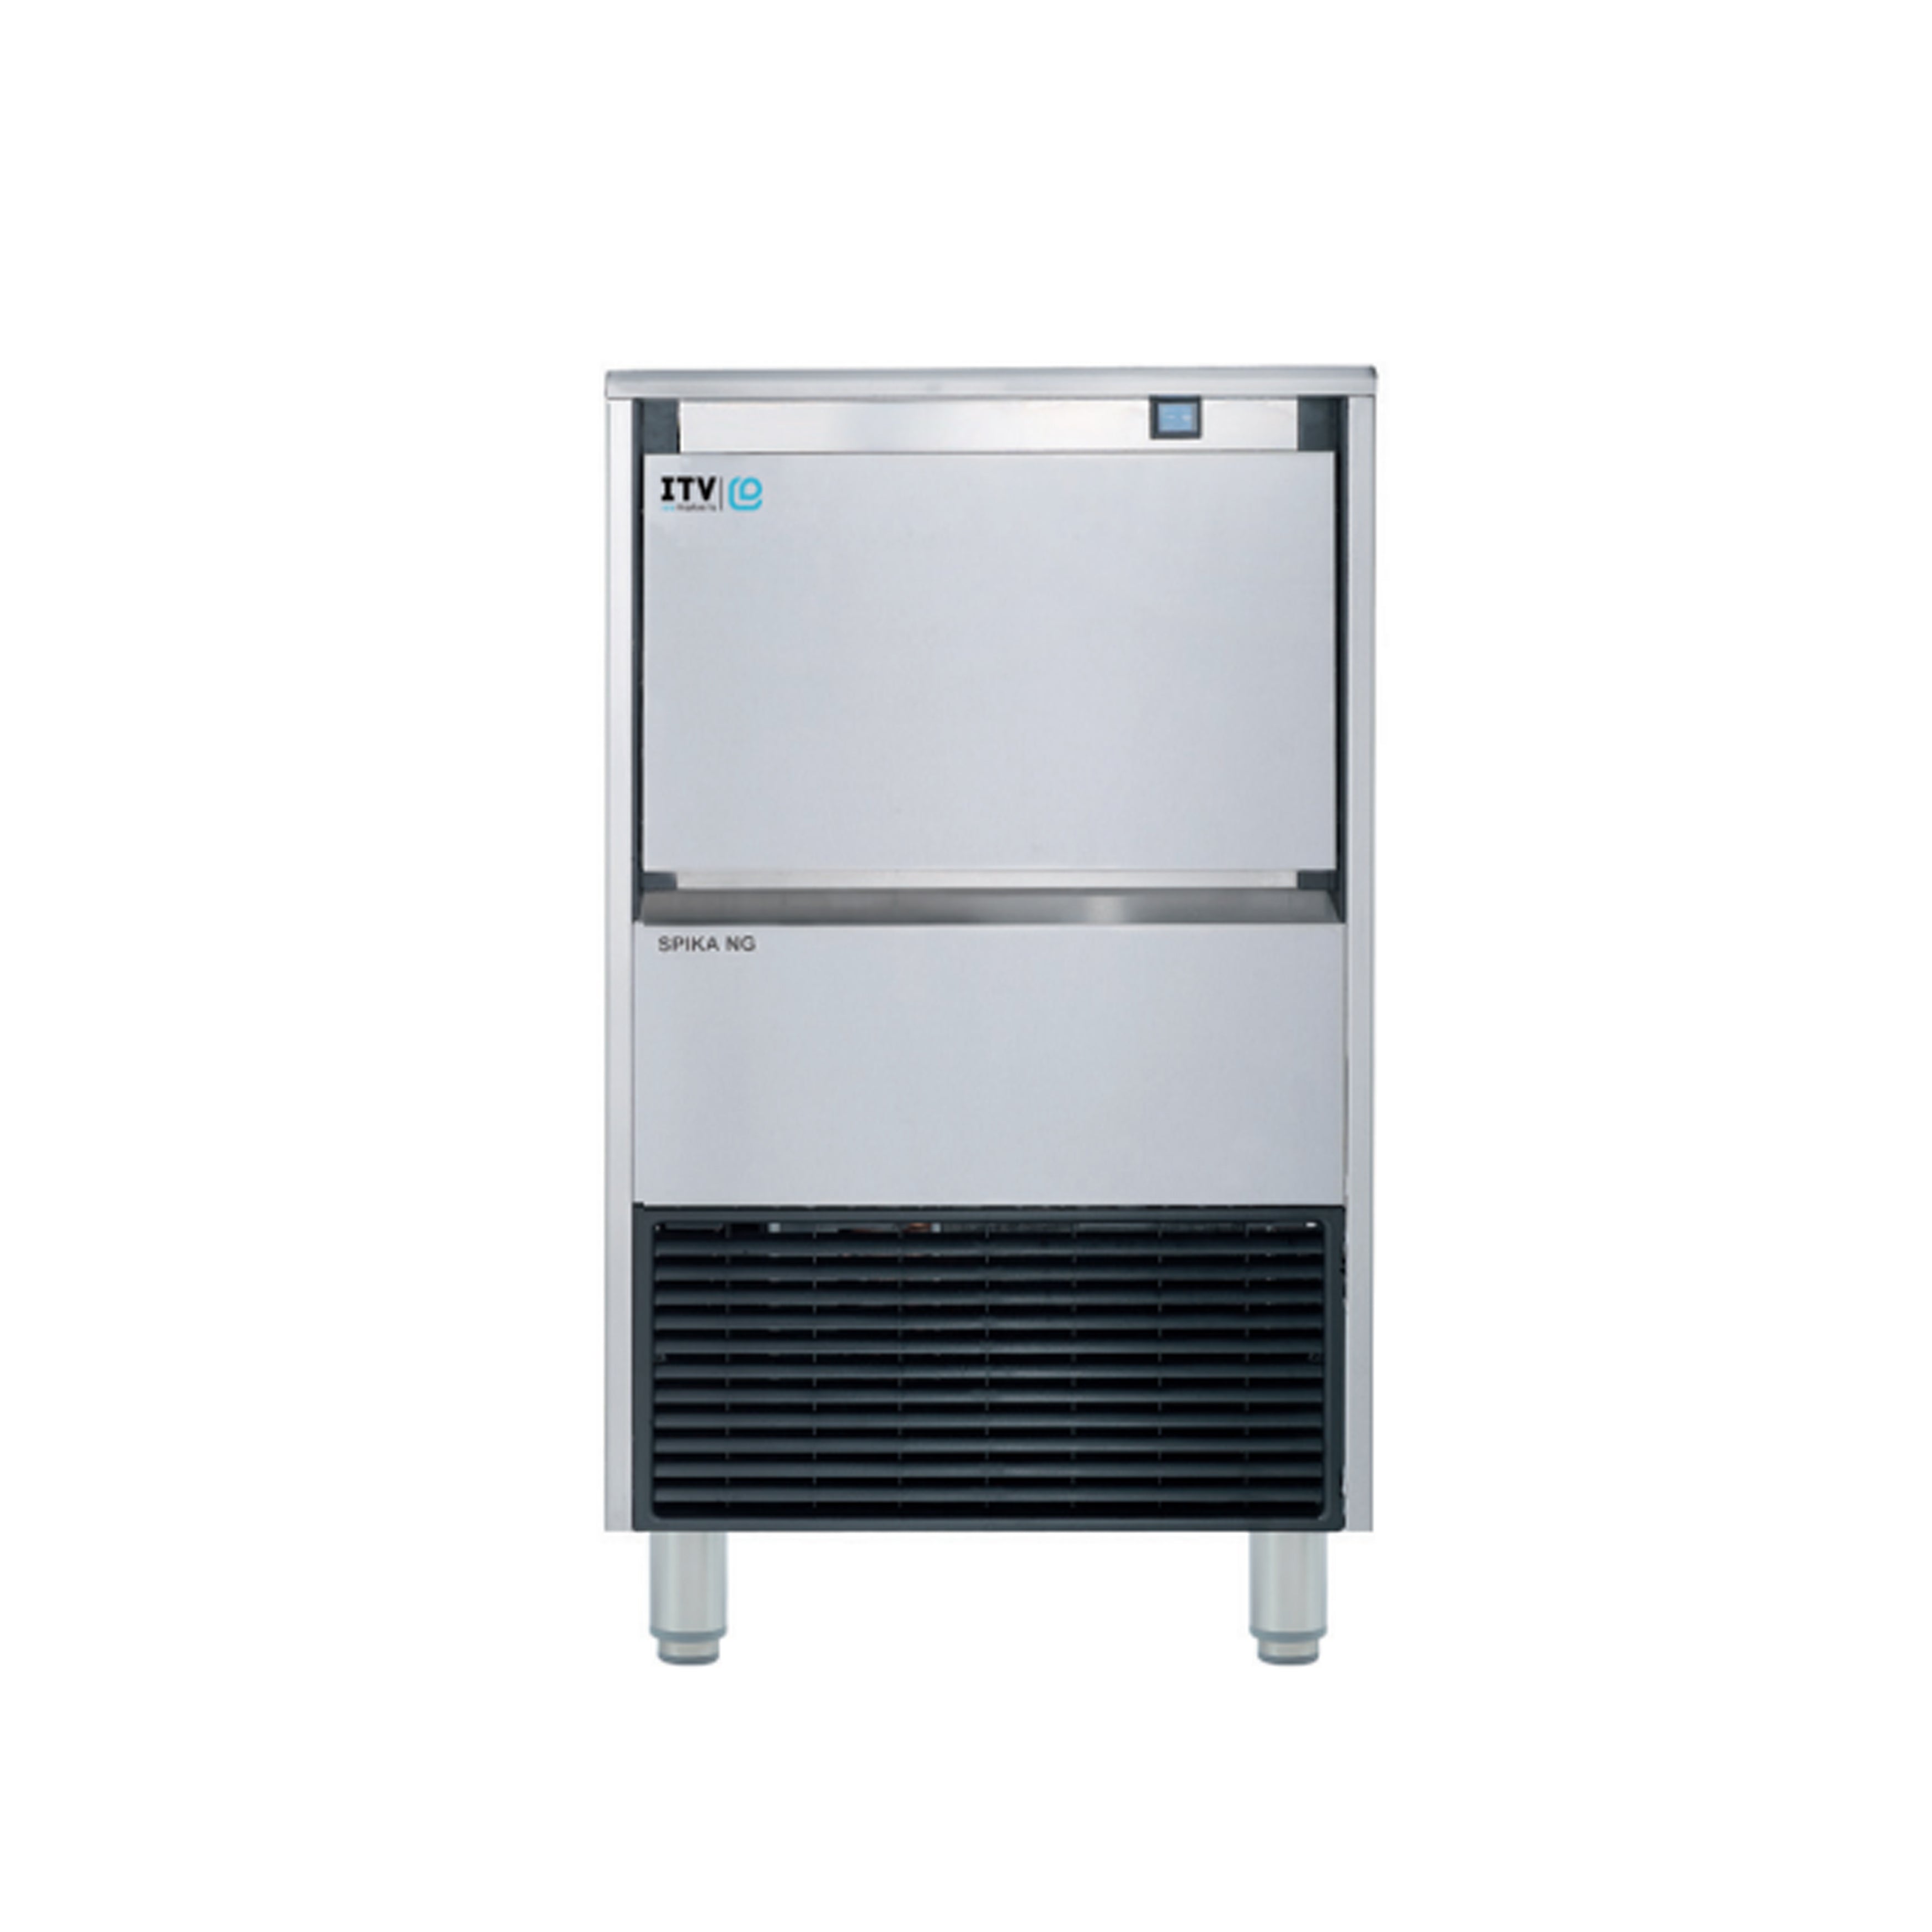 ITV - SPIKA NG 130A, Commercial Spika Cubers under-counter Ice Maker Self-Contained Ice Cube Machine 139lbs